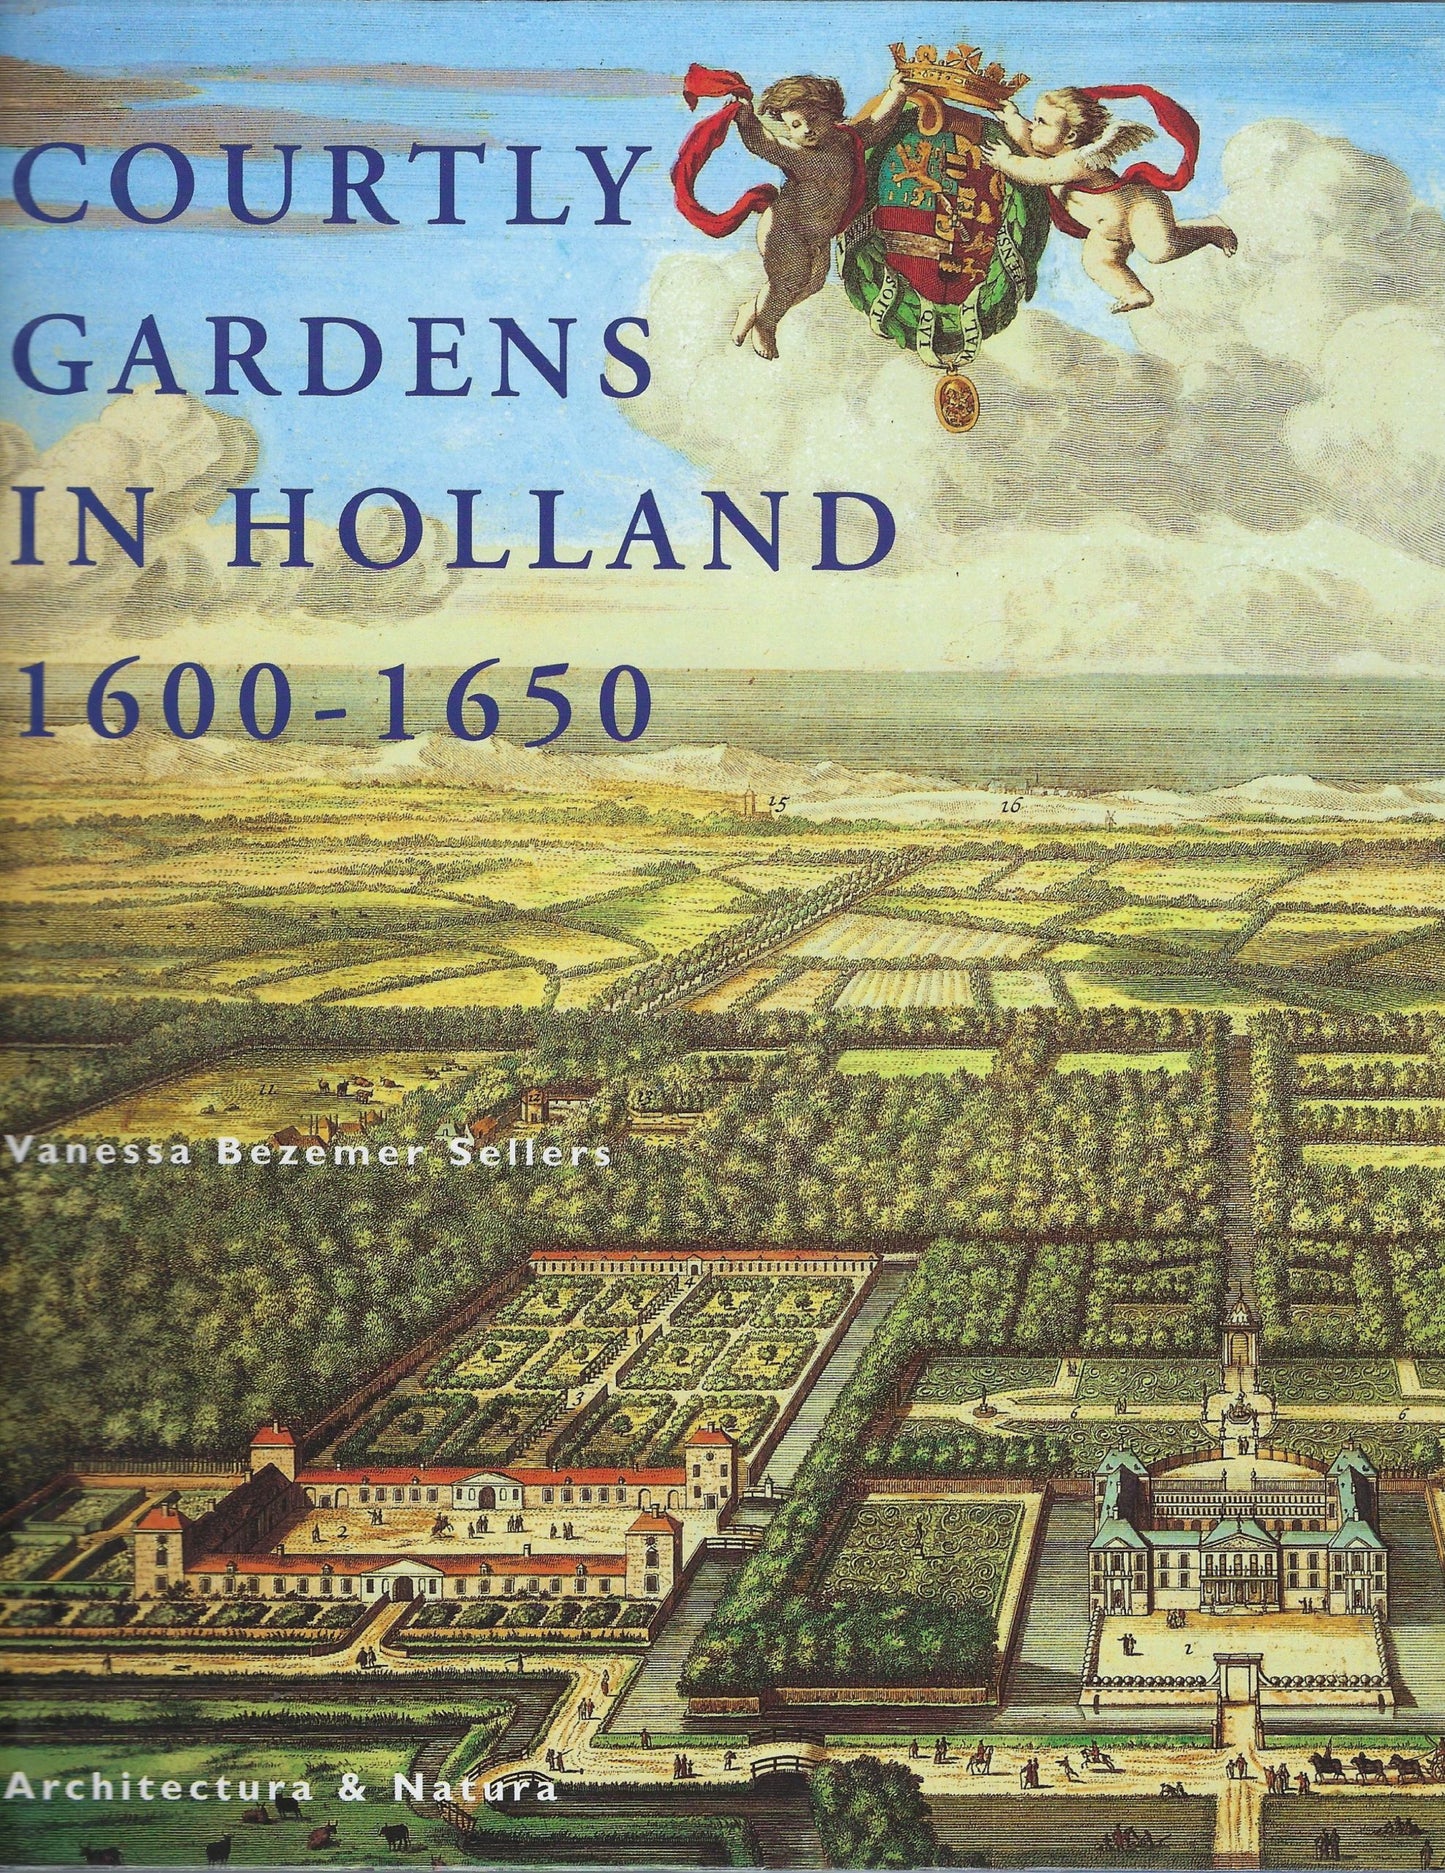 Courtly gardens in Holland 1600-1650